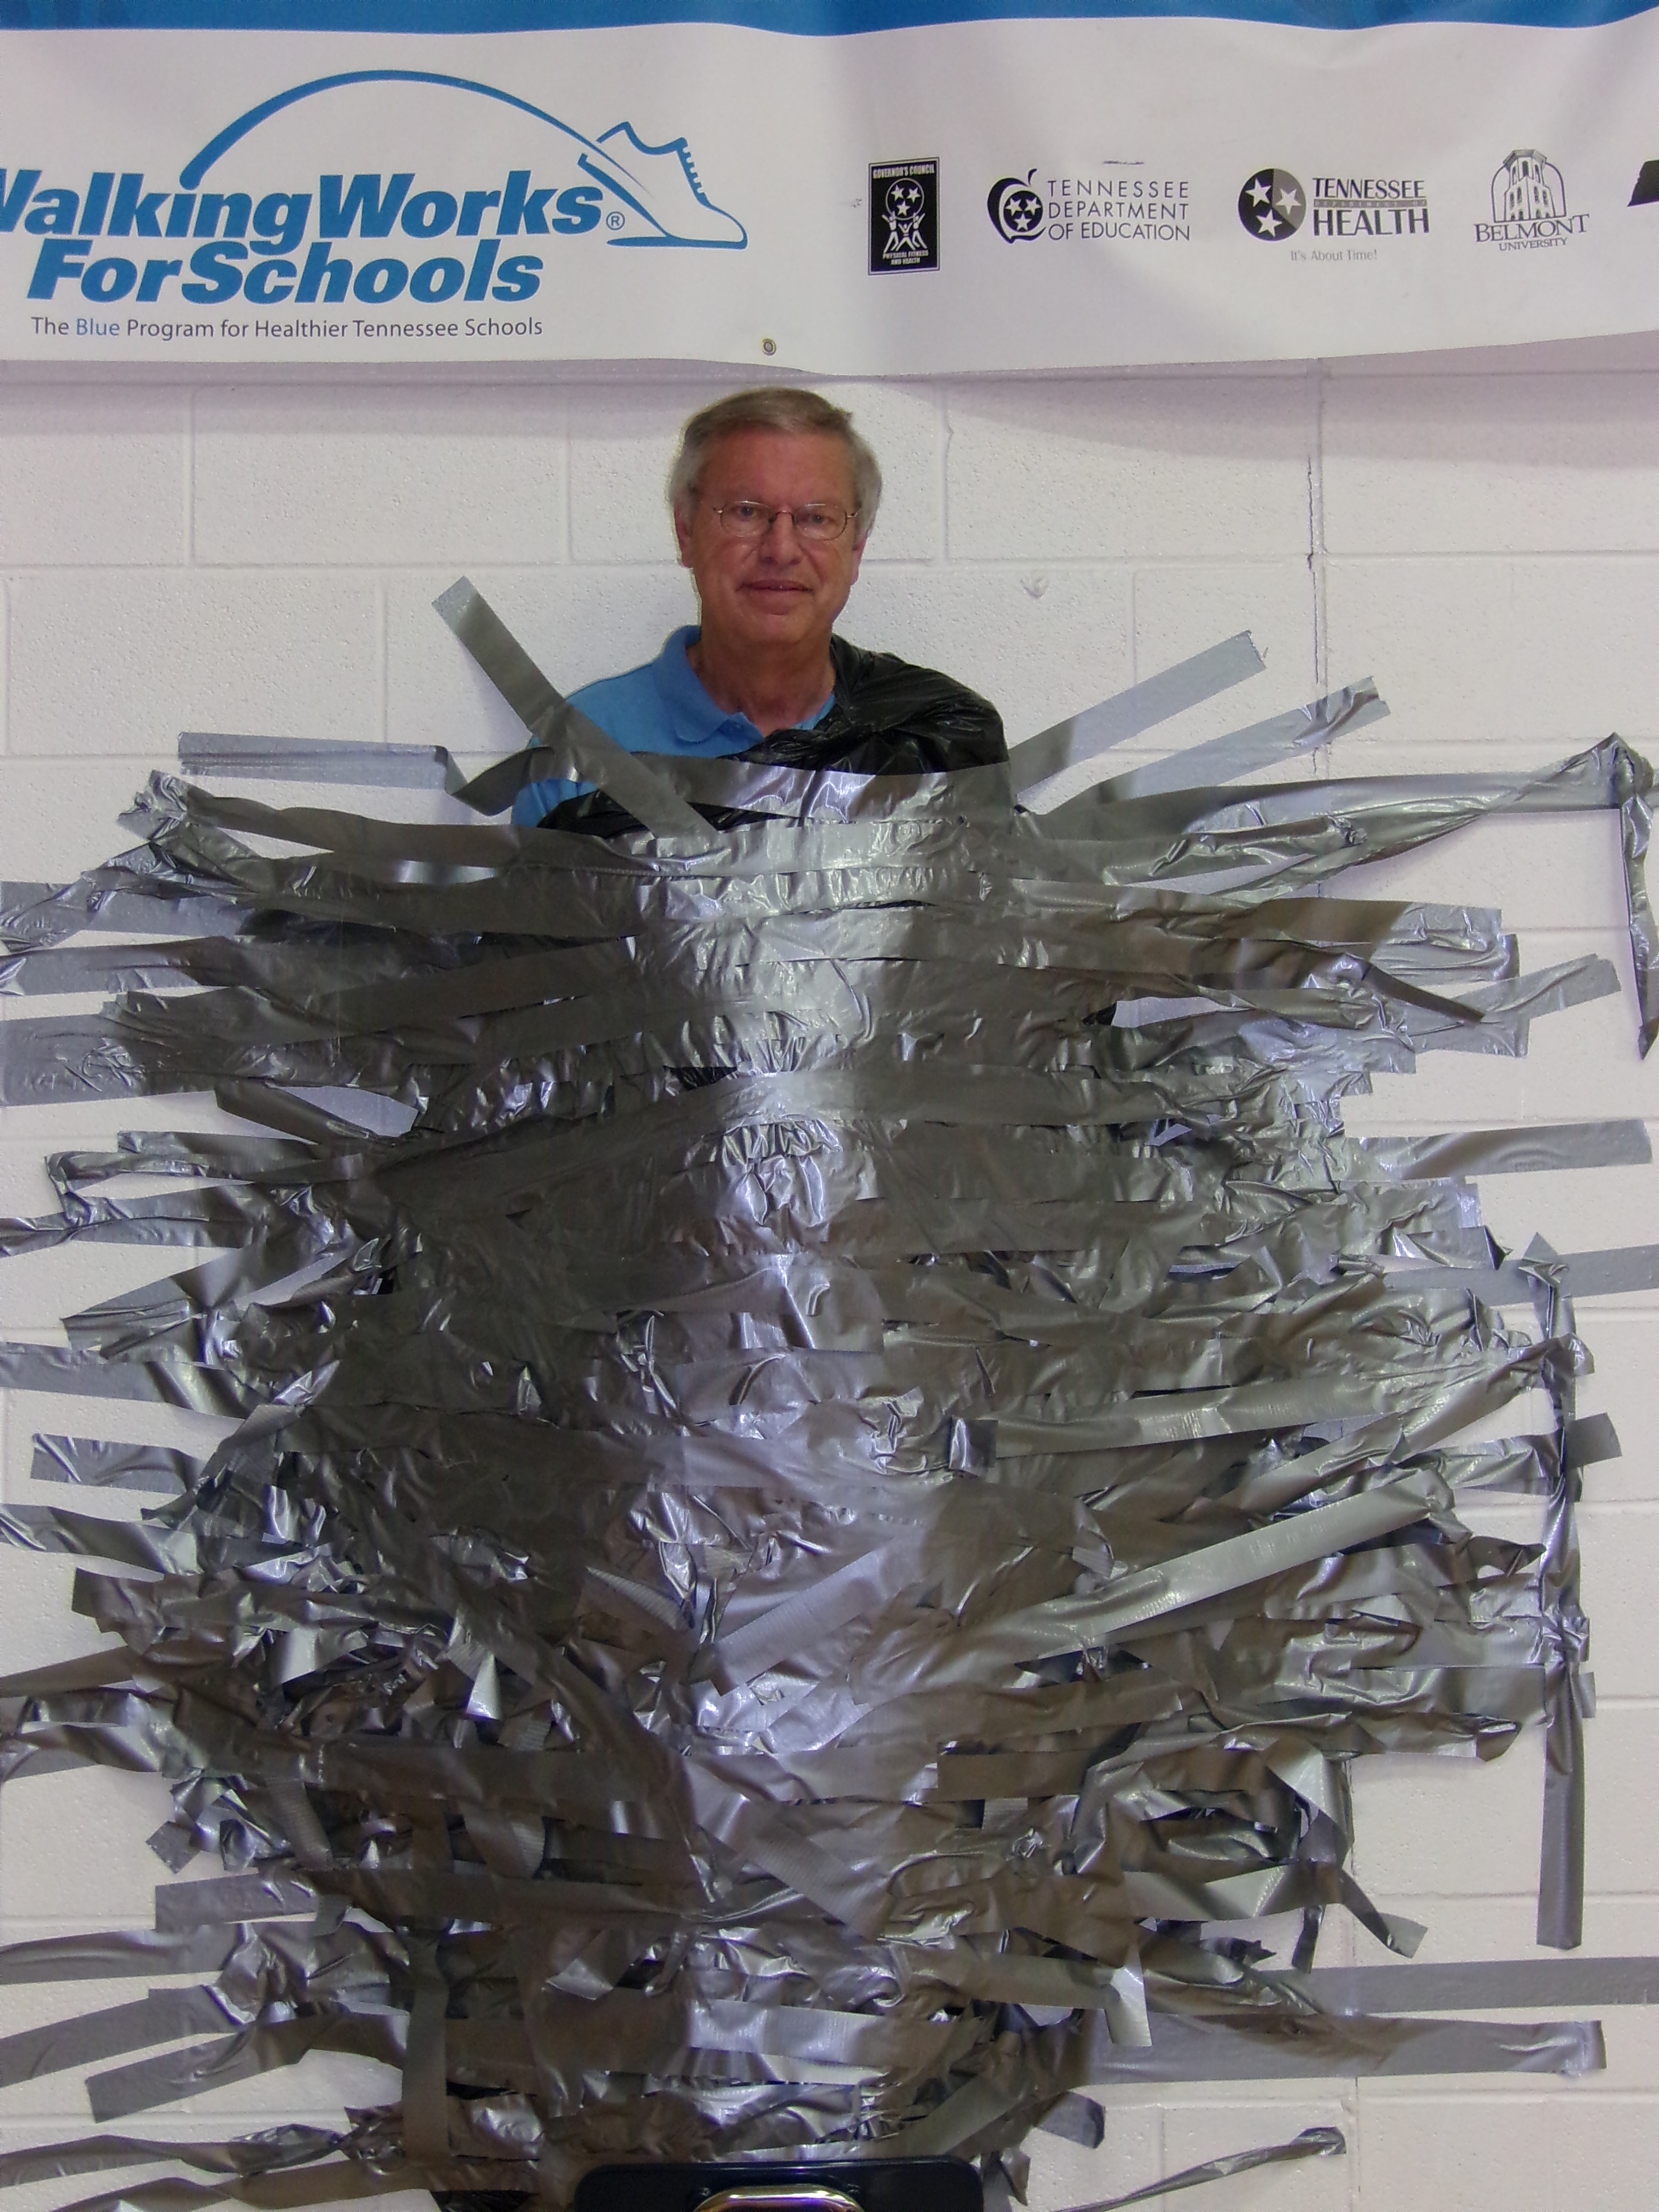 Bloomfield Teachers Duct Taped To Wall For Charity